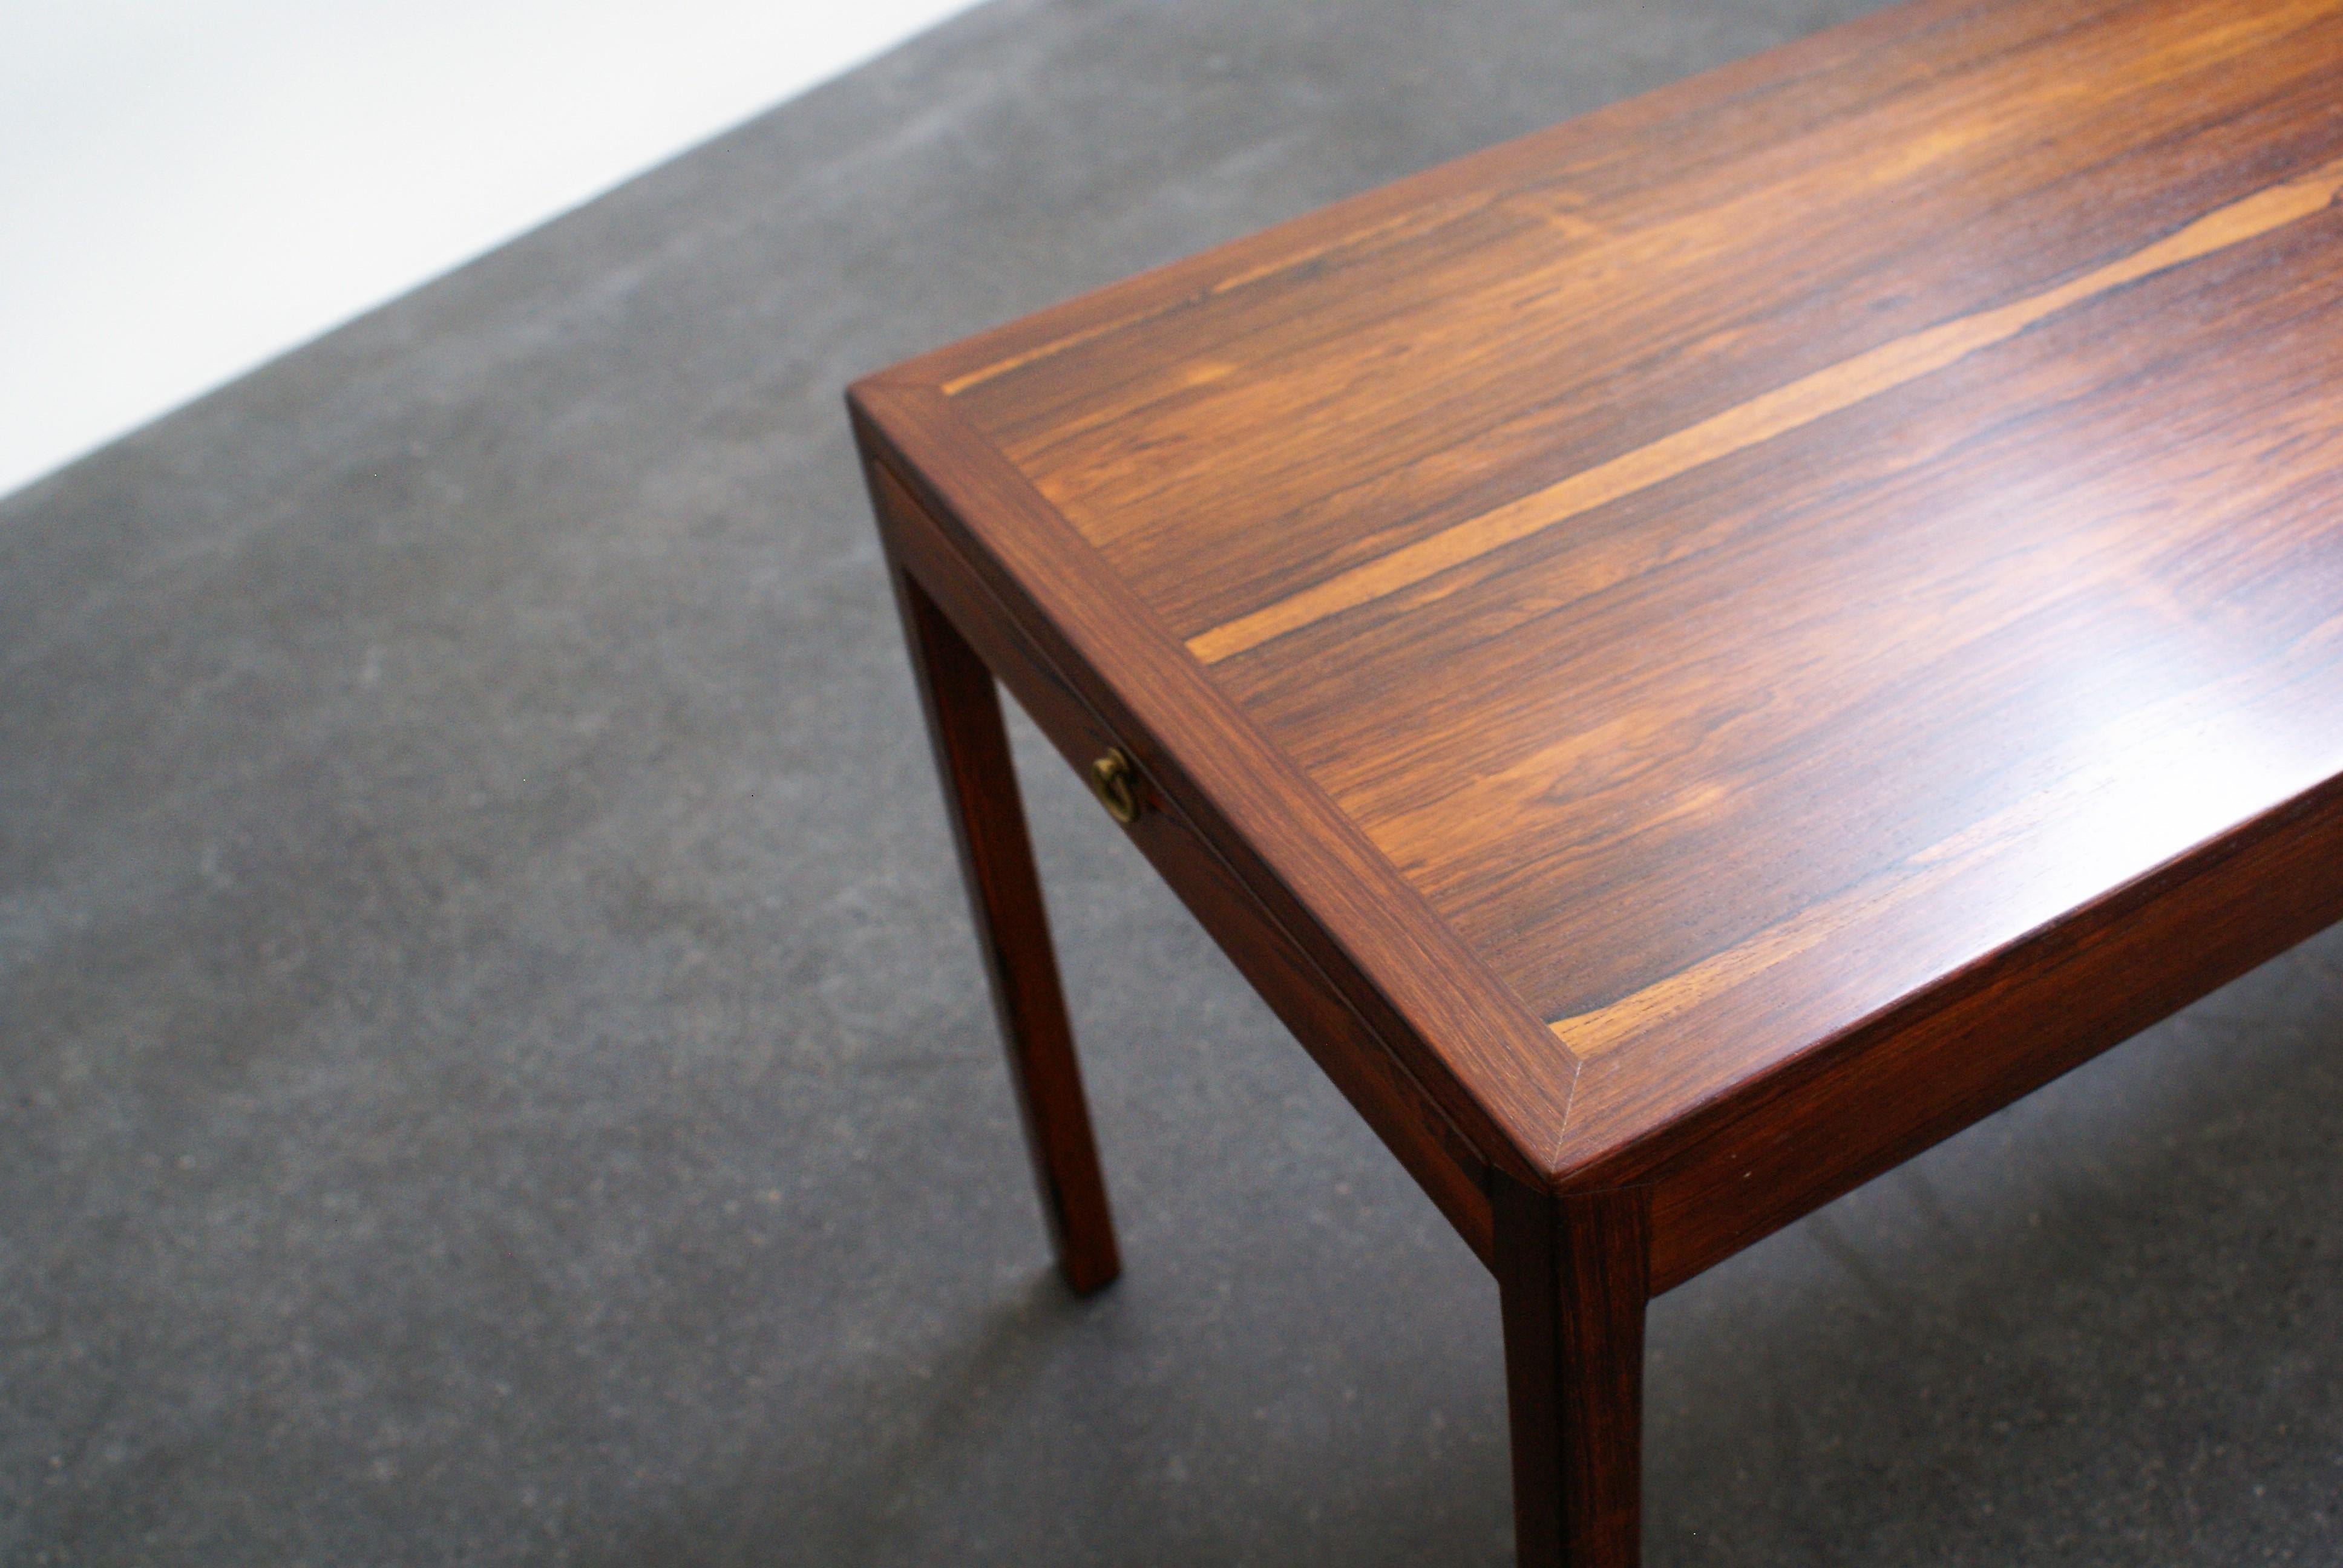 Brass Ole Wanscher Extendable Low Table in Brazilian Rosewood for A. J. Iversen, 1950s For Sale